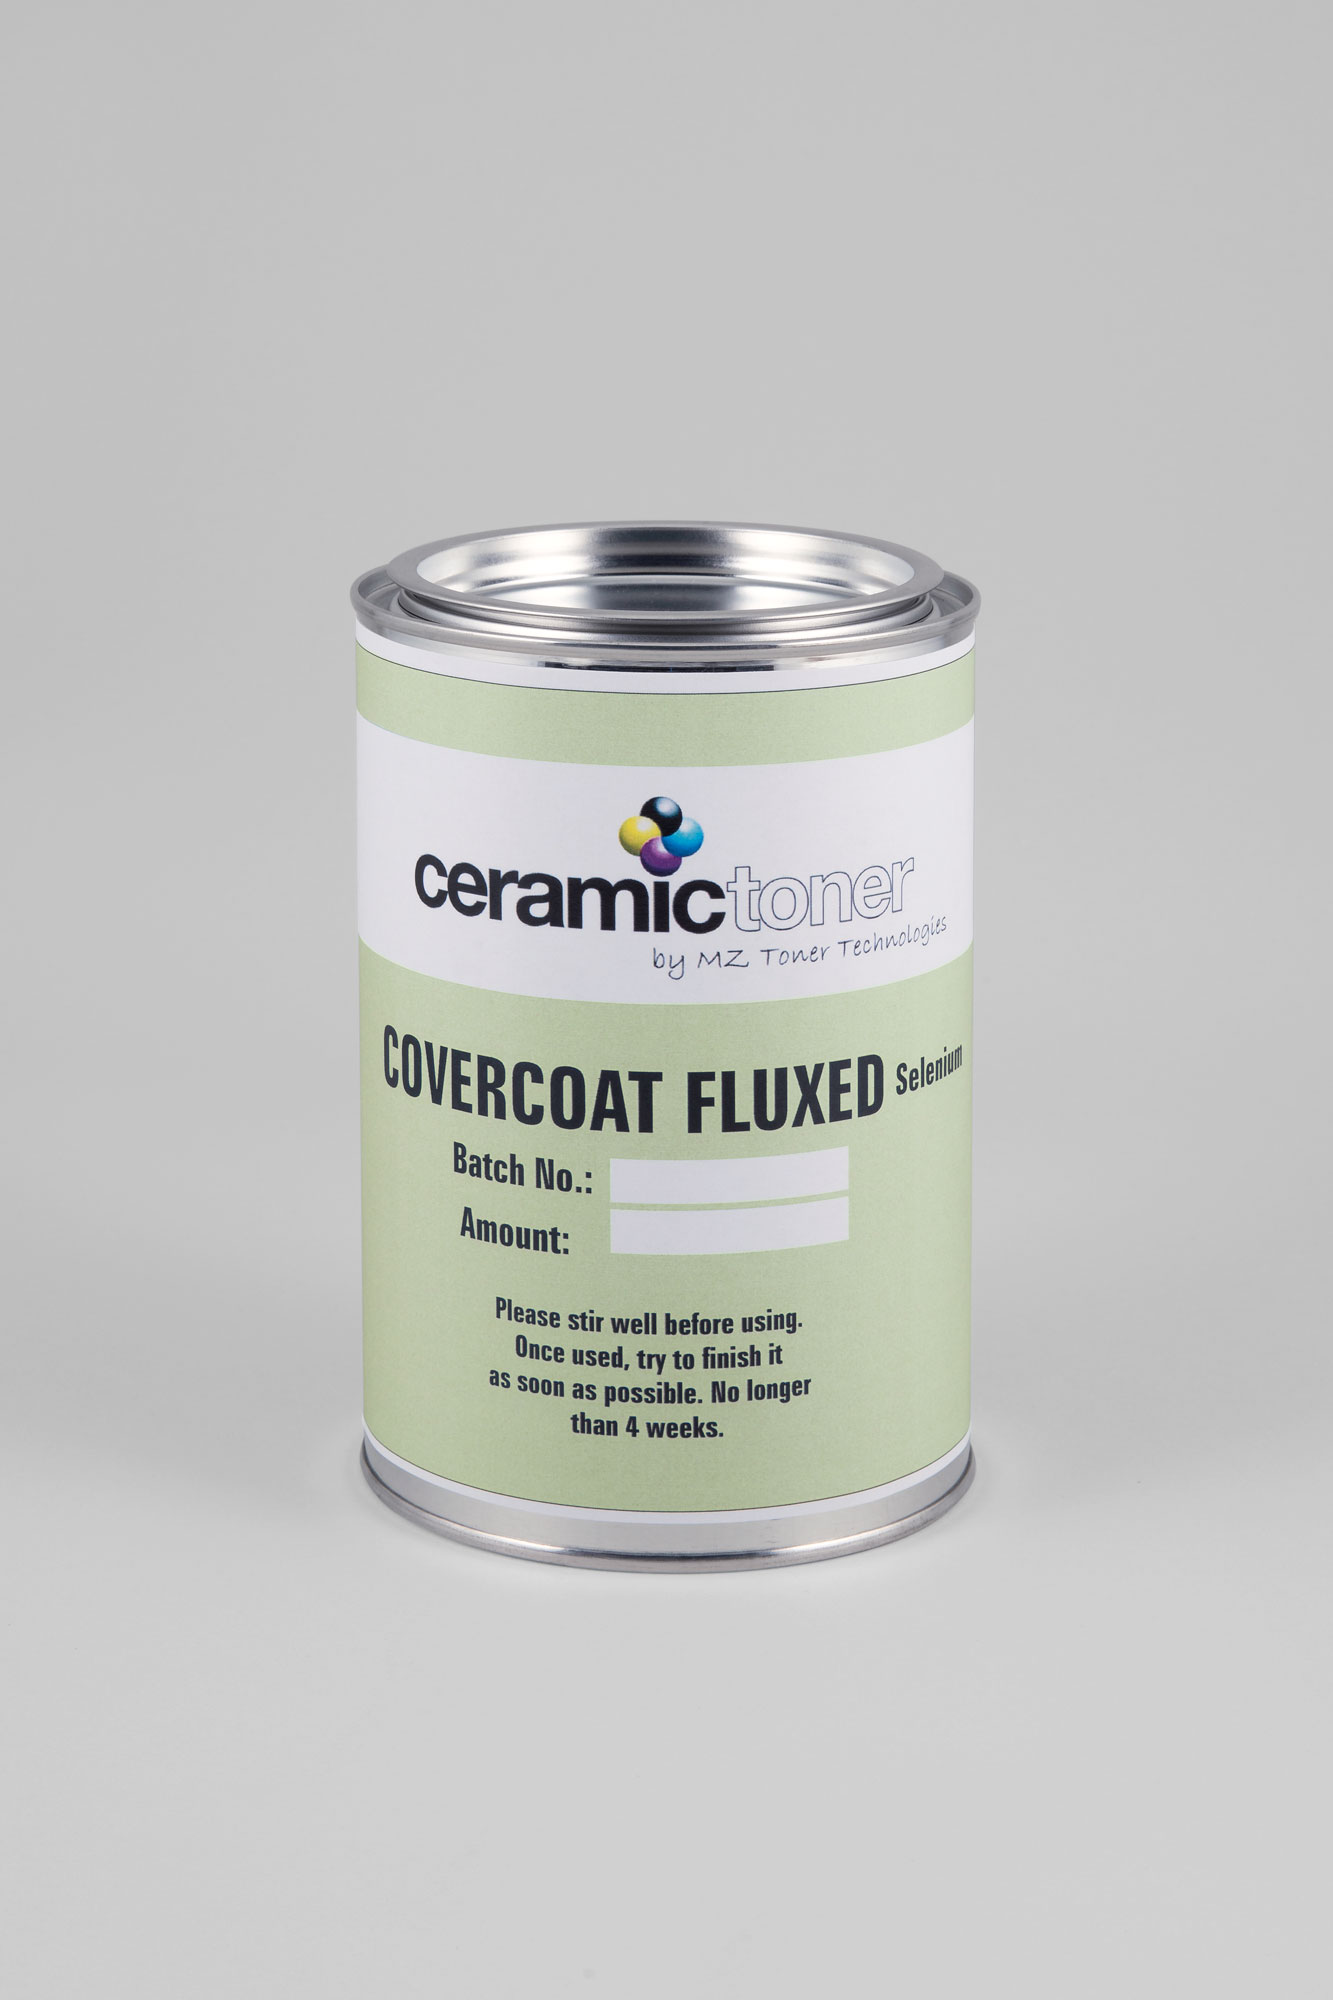 Ceramictoner Covercoat Fluxed Selenium is varnish with selenium flux. The coating is in a can and is suitable for low firing temperatures. The varnish is greenish...